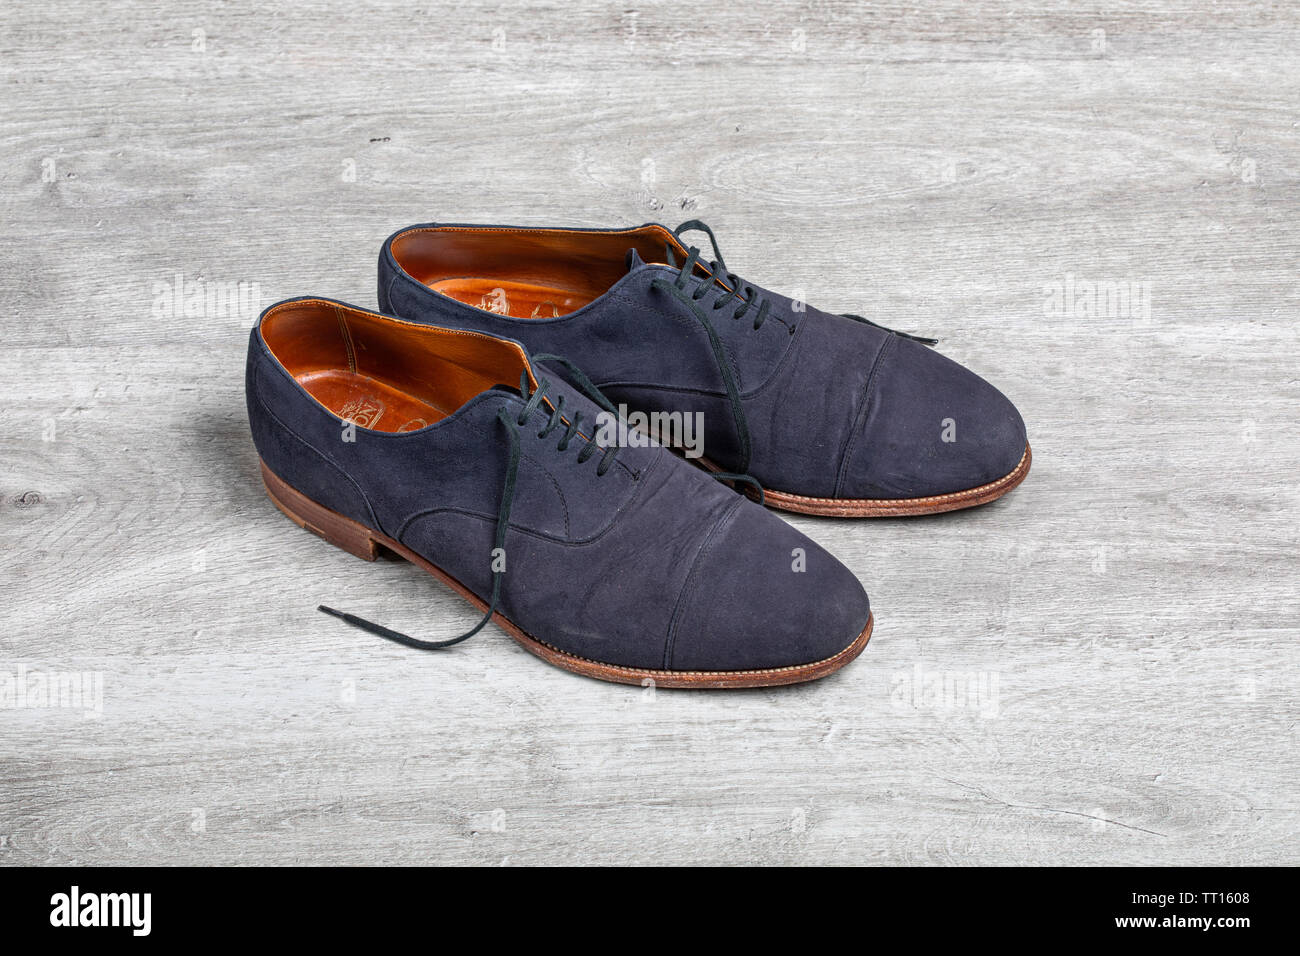 Blue suede shoes Stock Photo